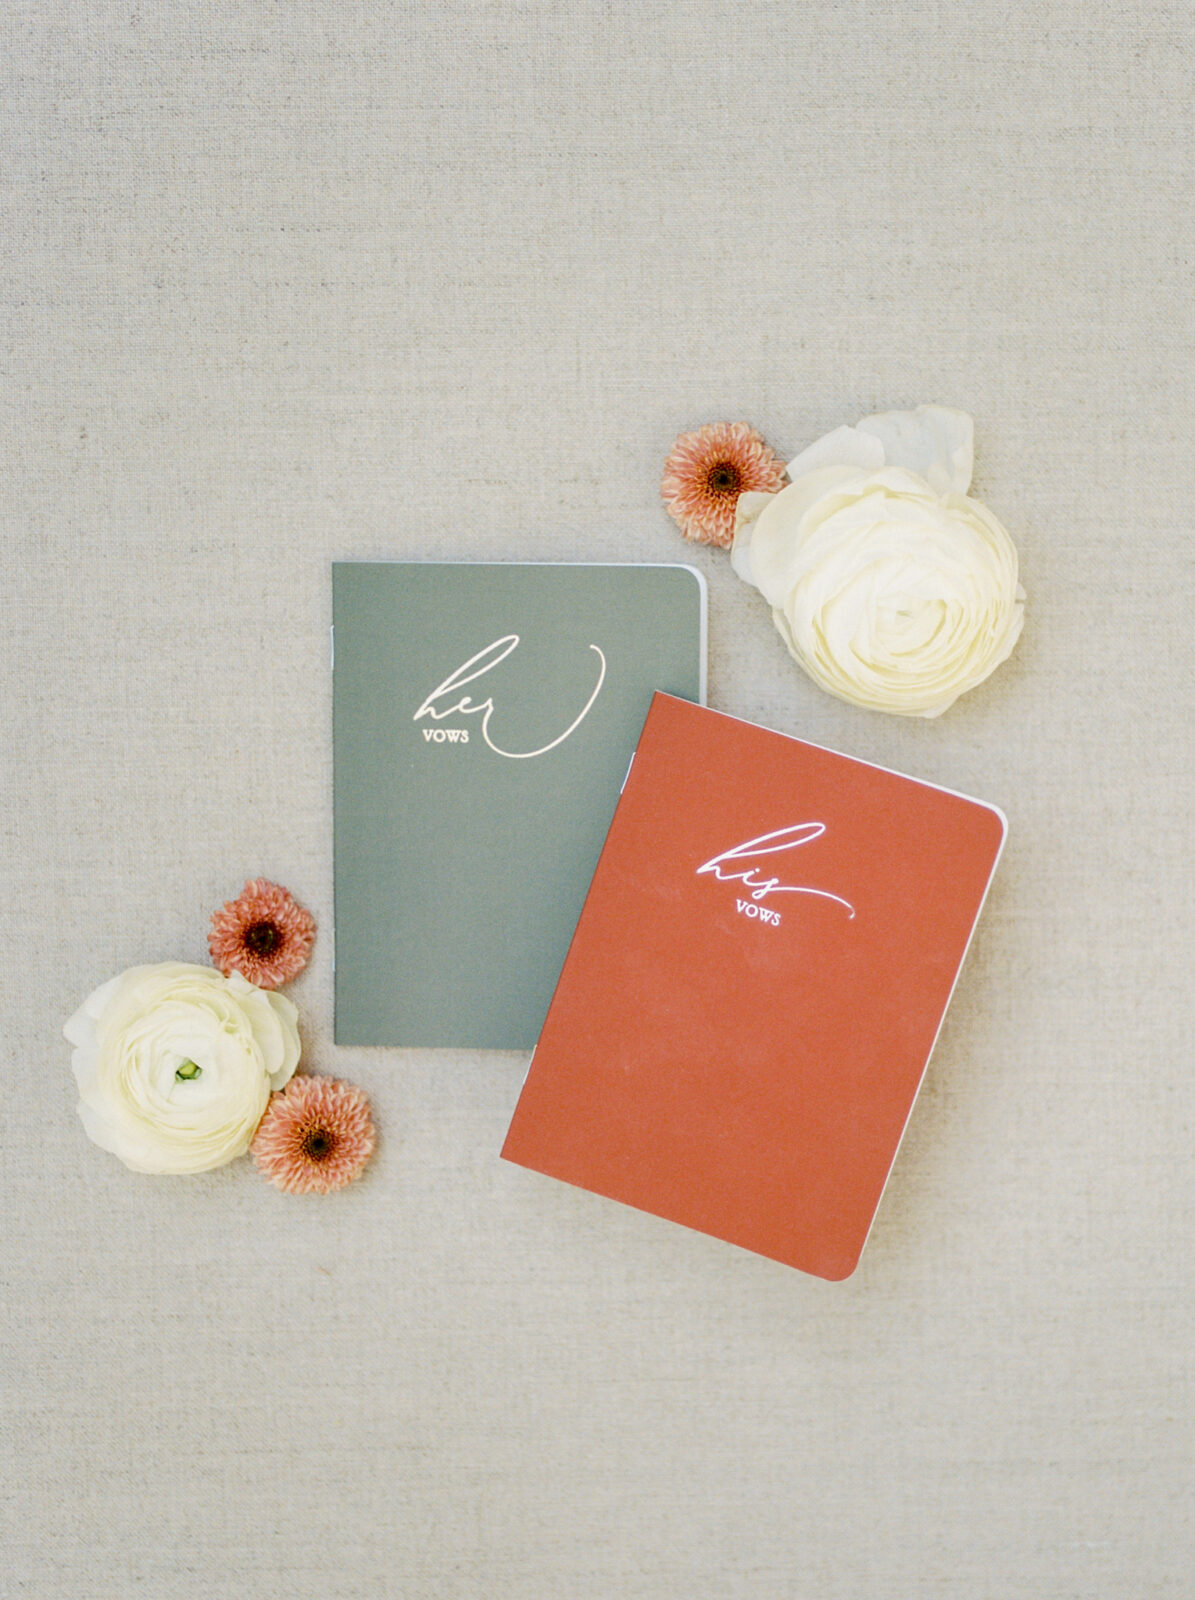 His and hers vow books in muted shades of orange and green for a fall wedding colour scheme, white florals with accents of orange, modern flat lay design with vow books and florals